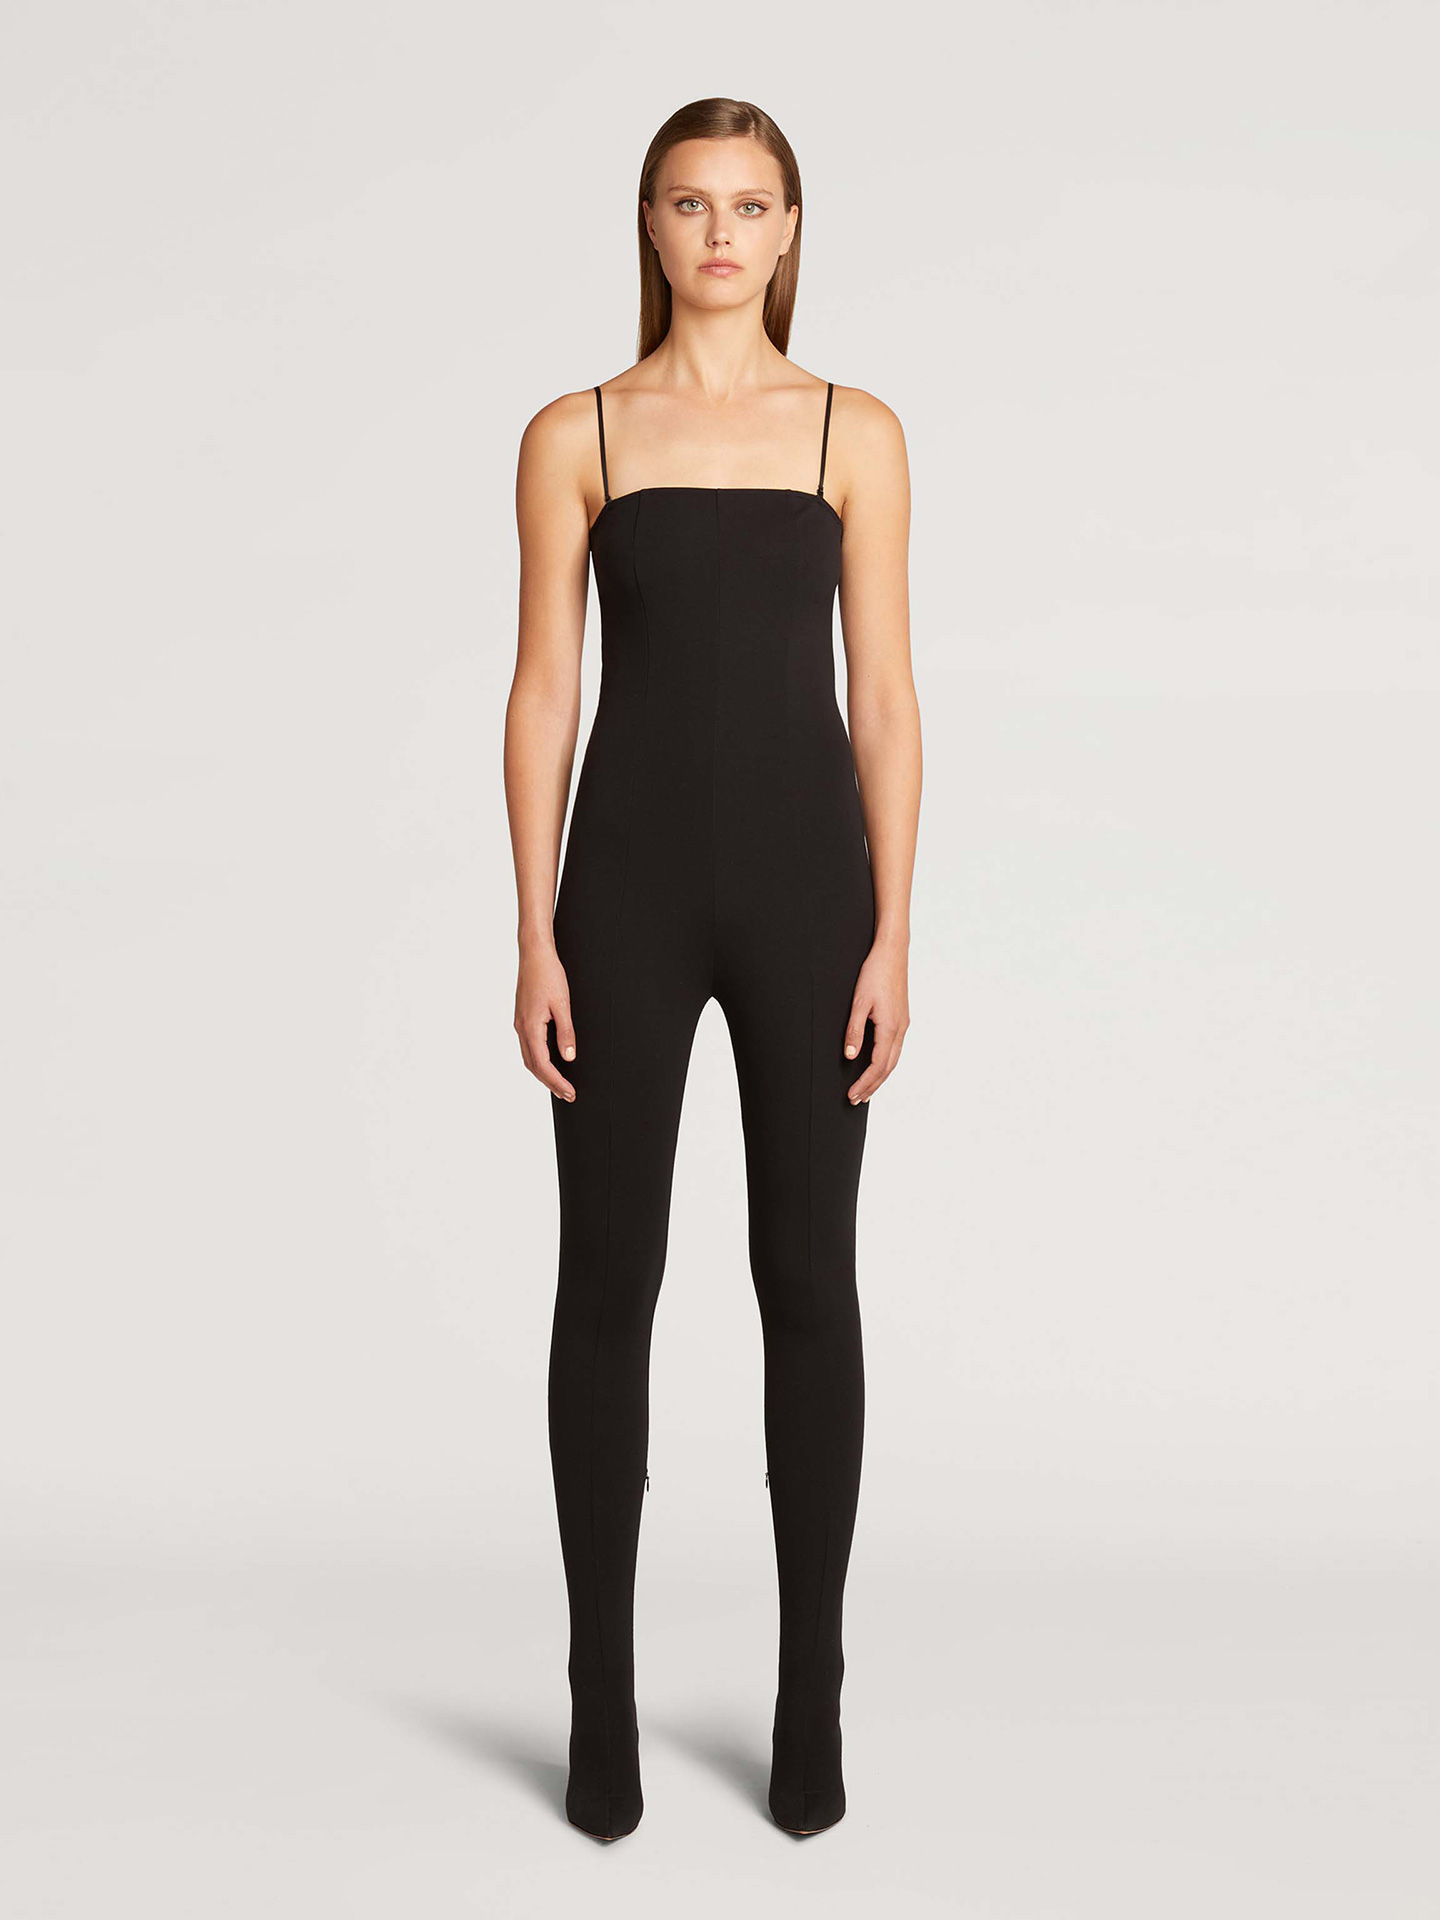 Wolford - Catsuit with shoes, Frau, black, Größe: XS39 von Wolford